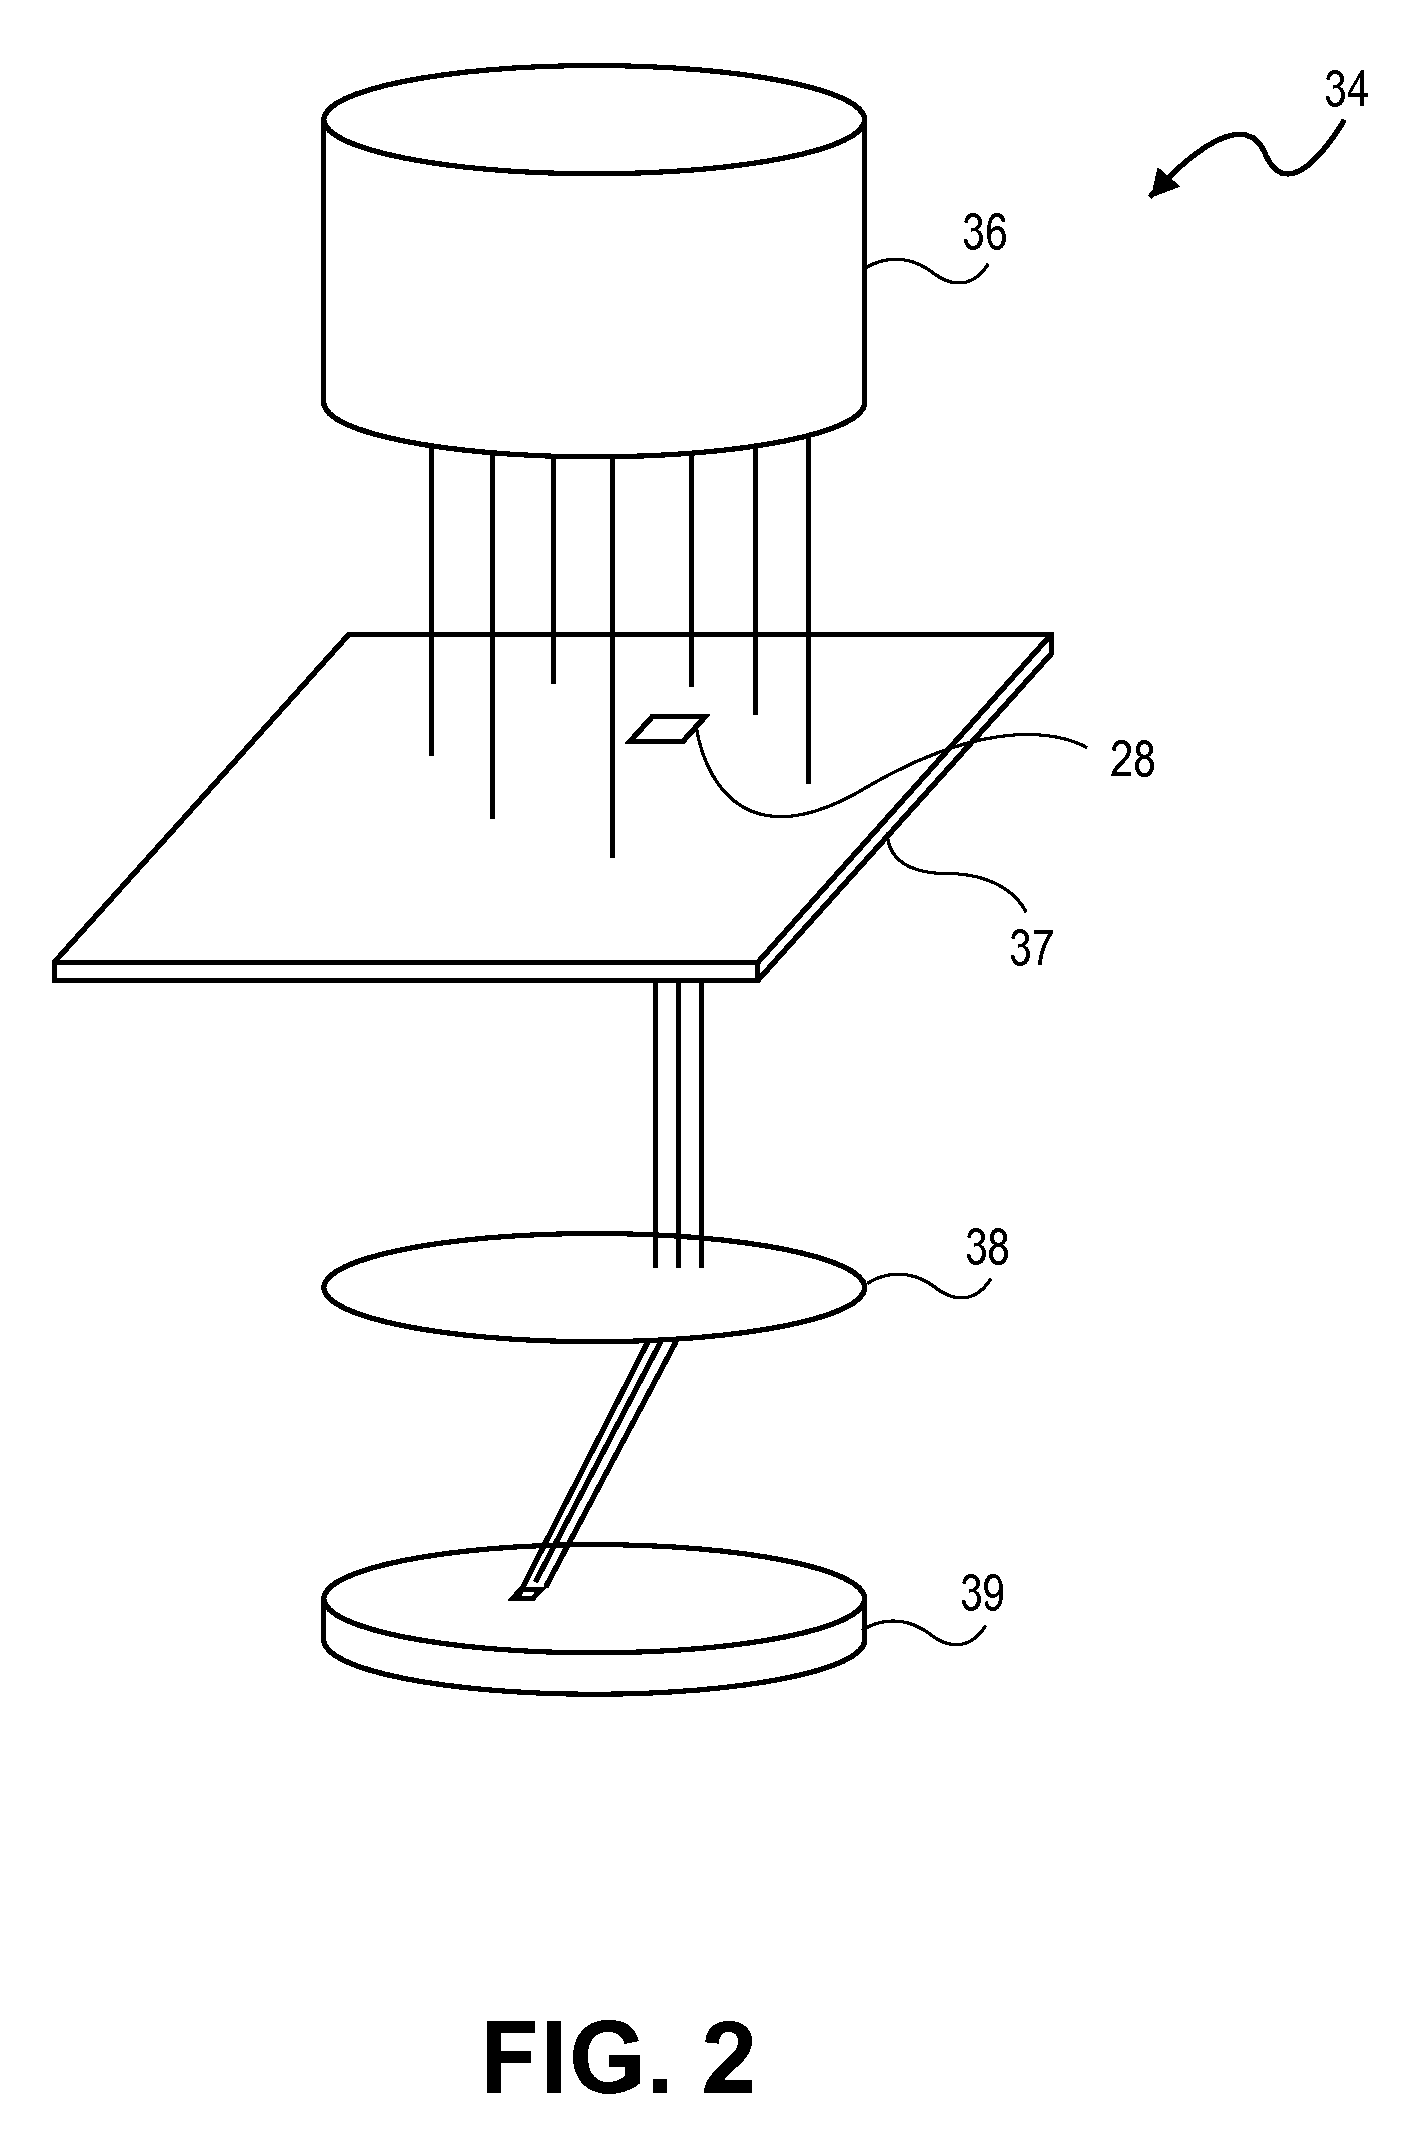 Method for design and manufacture of a reticle using variable shaped beam lithography